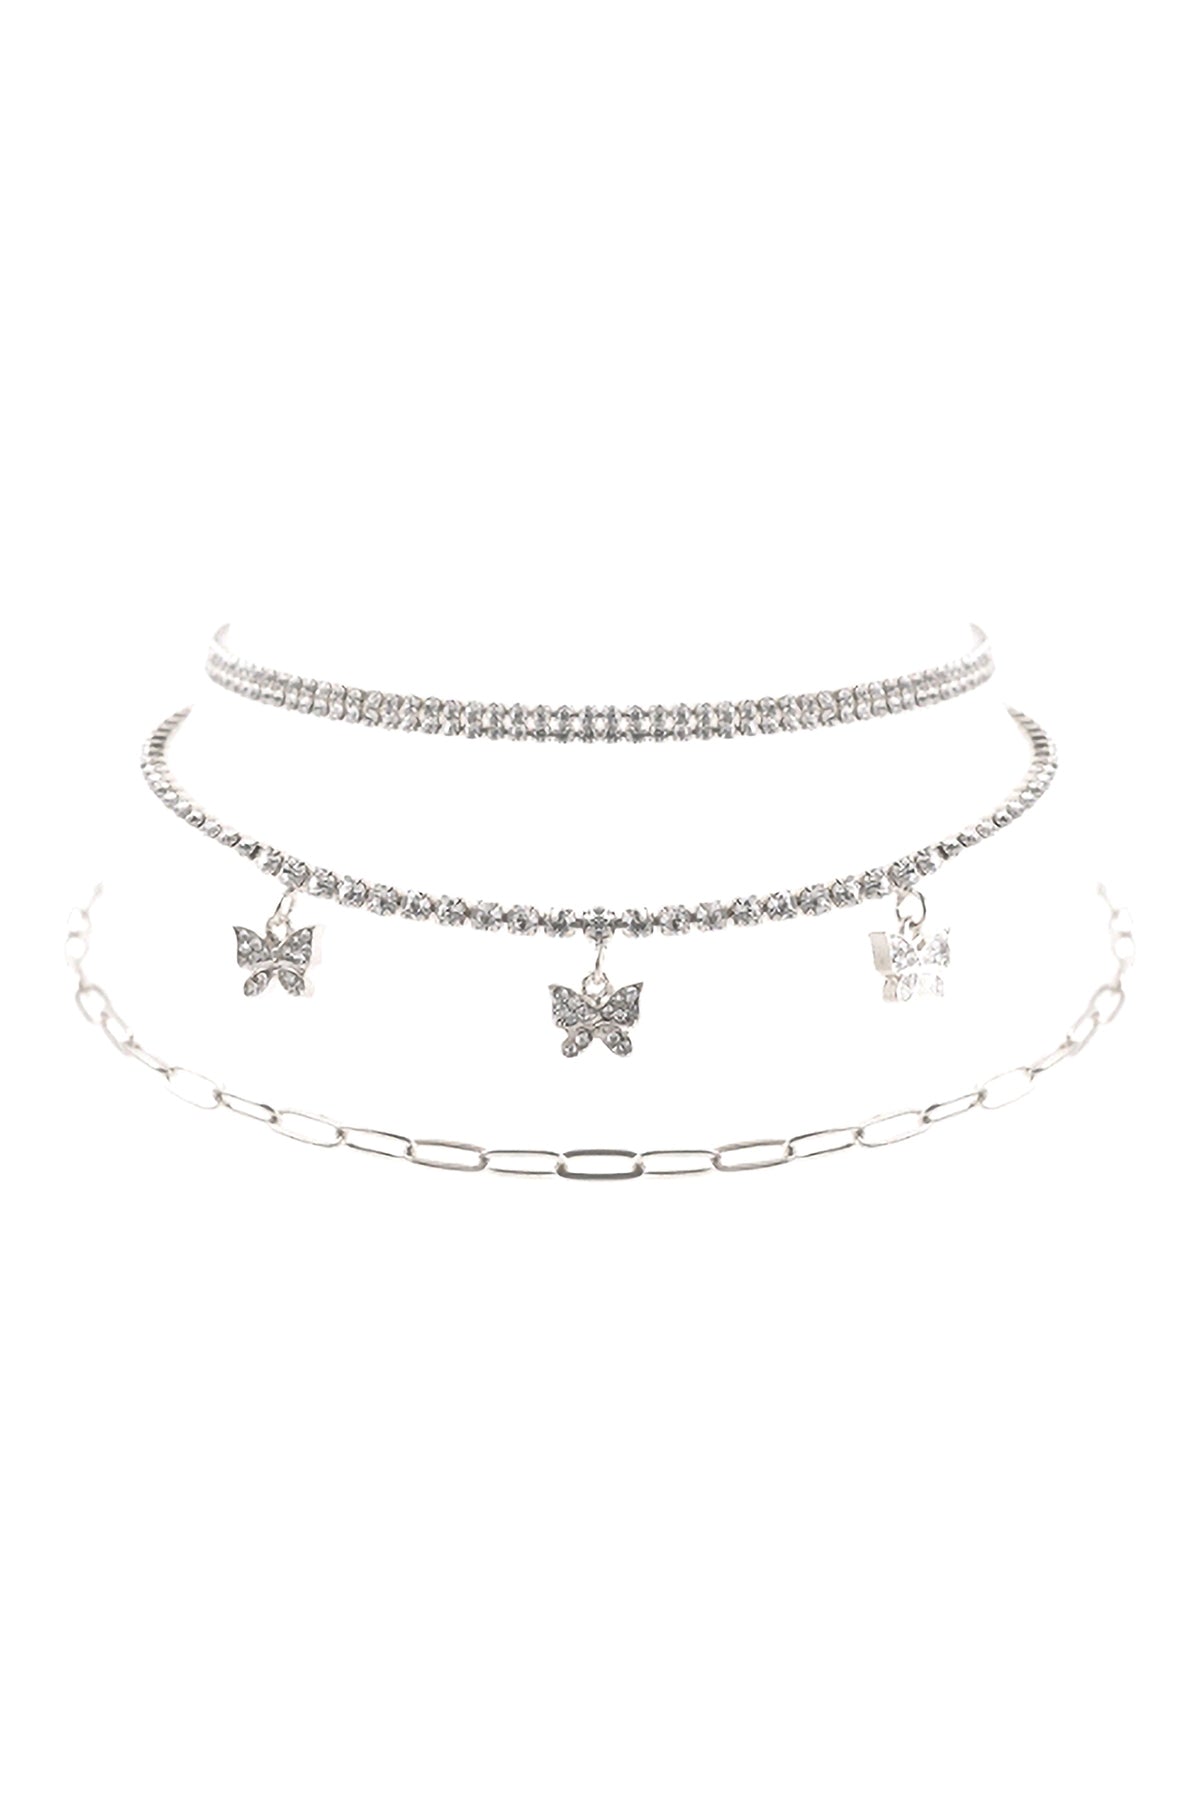 RHINESTONE BUTTERFLY CHARM 3 SET NECKLACE (NOW $3.00 ONLY!)